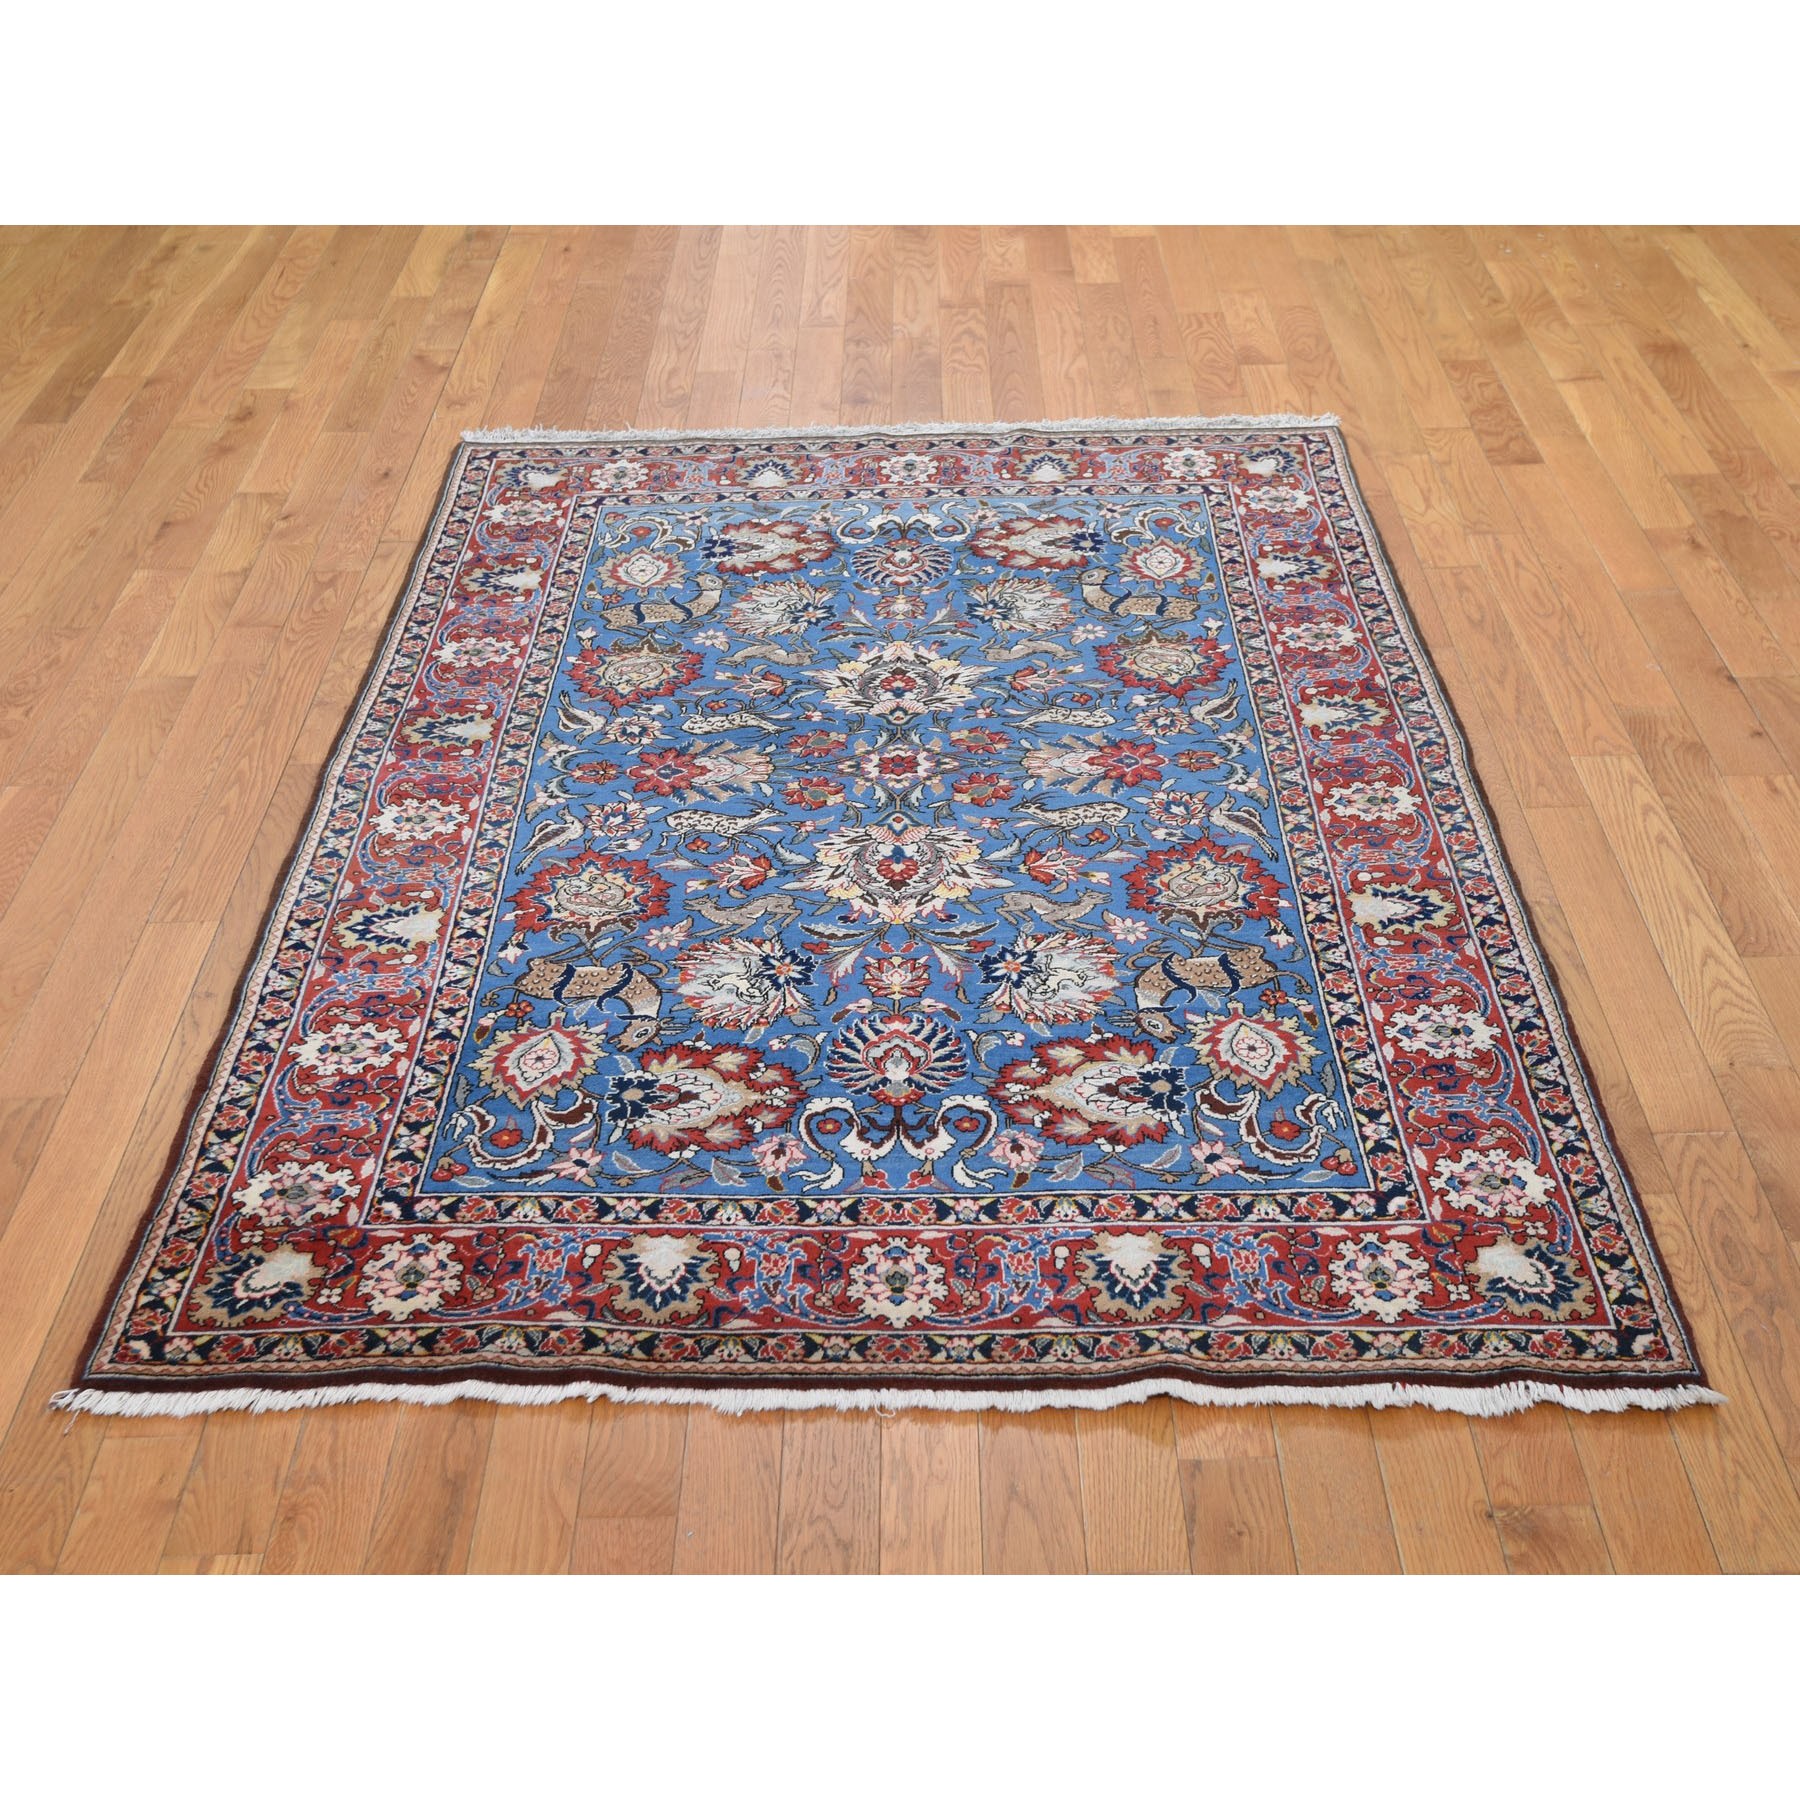 4'8"x7' Blue Vintage Persian Qum Full Pile Exc Condition Hand Woven Oriental Rug 